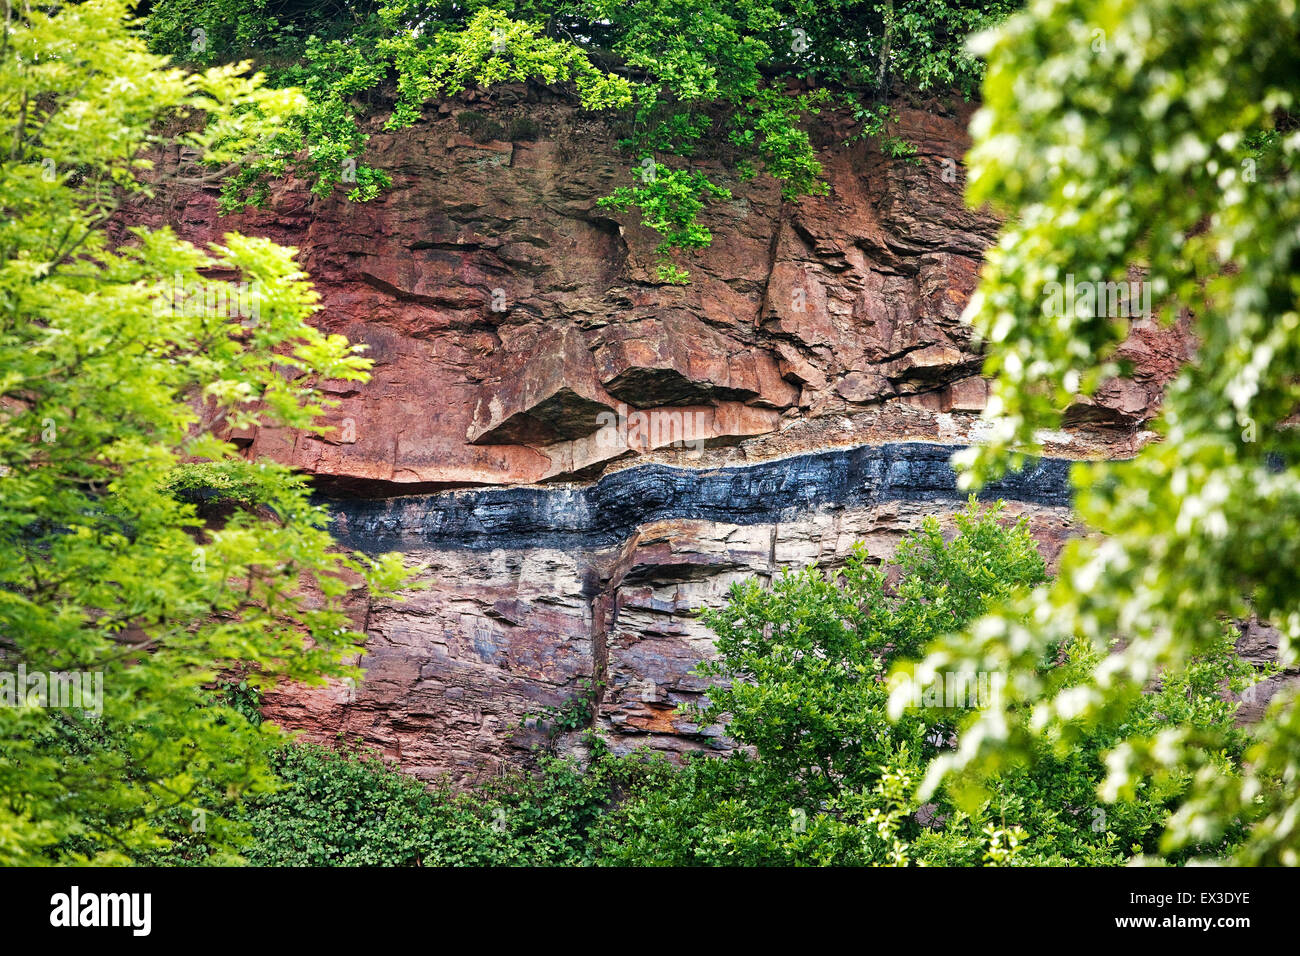 Geological outcrop with overground coal seam, Witten, Ruhr district, North Rhine-Westphalia, Germany Stock Photo